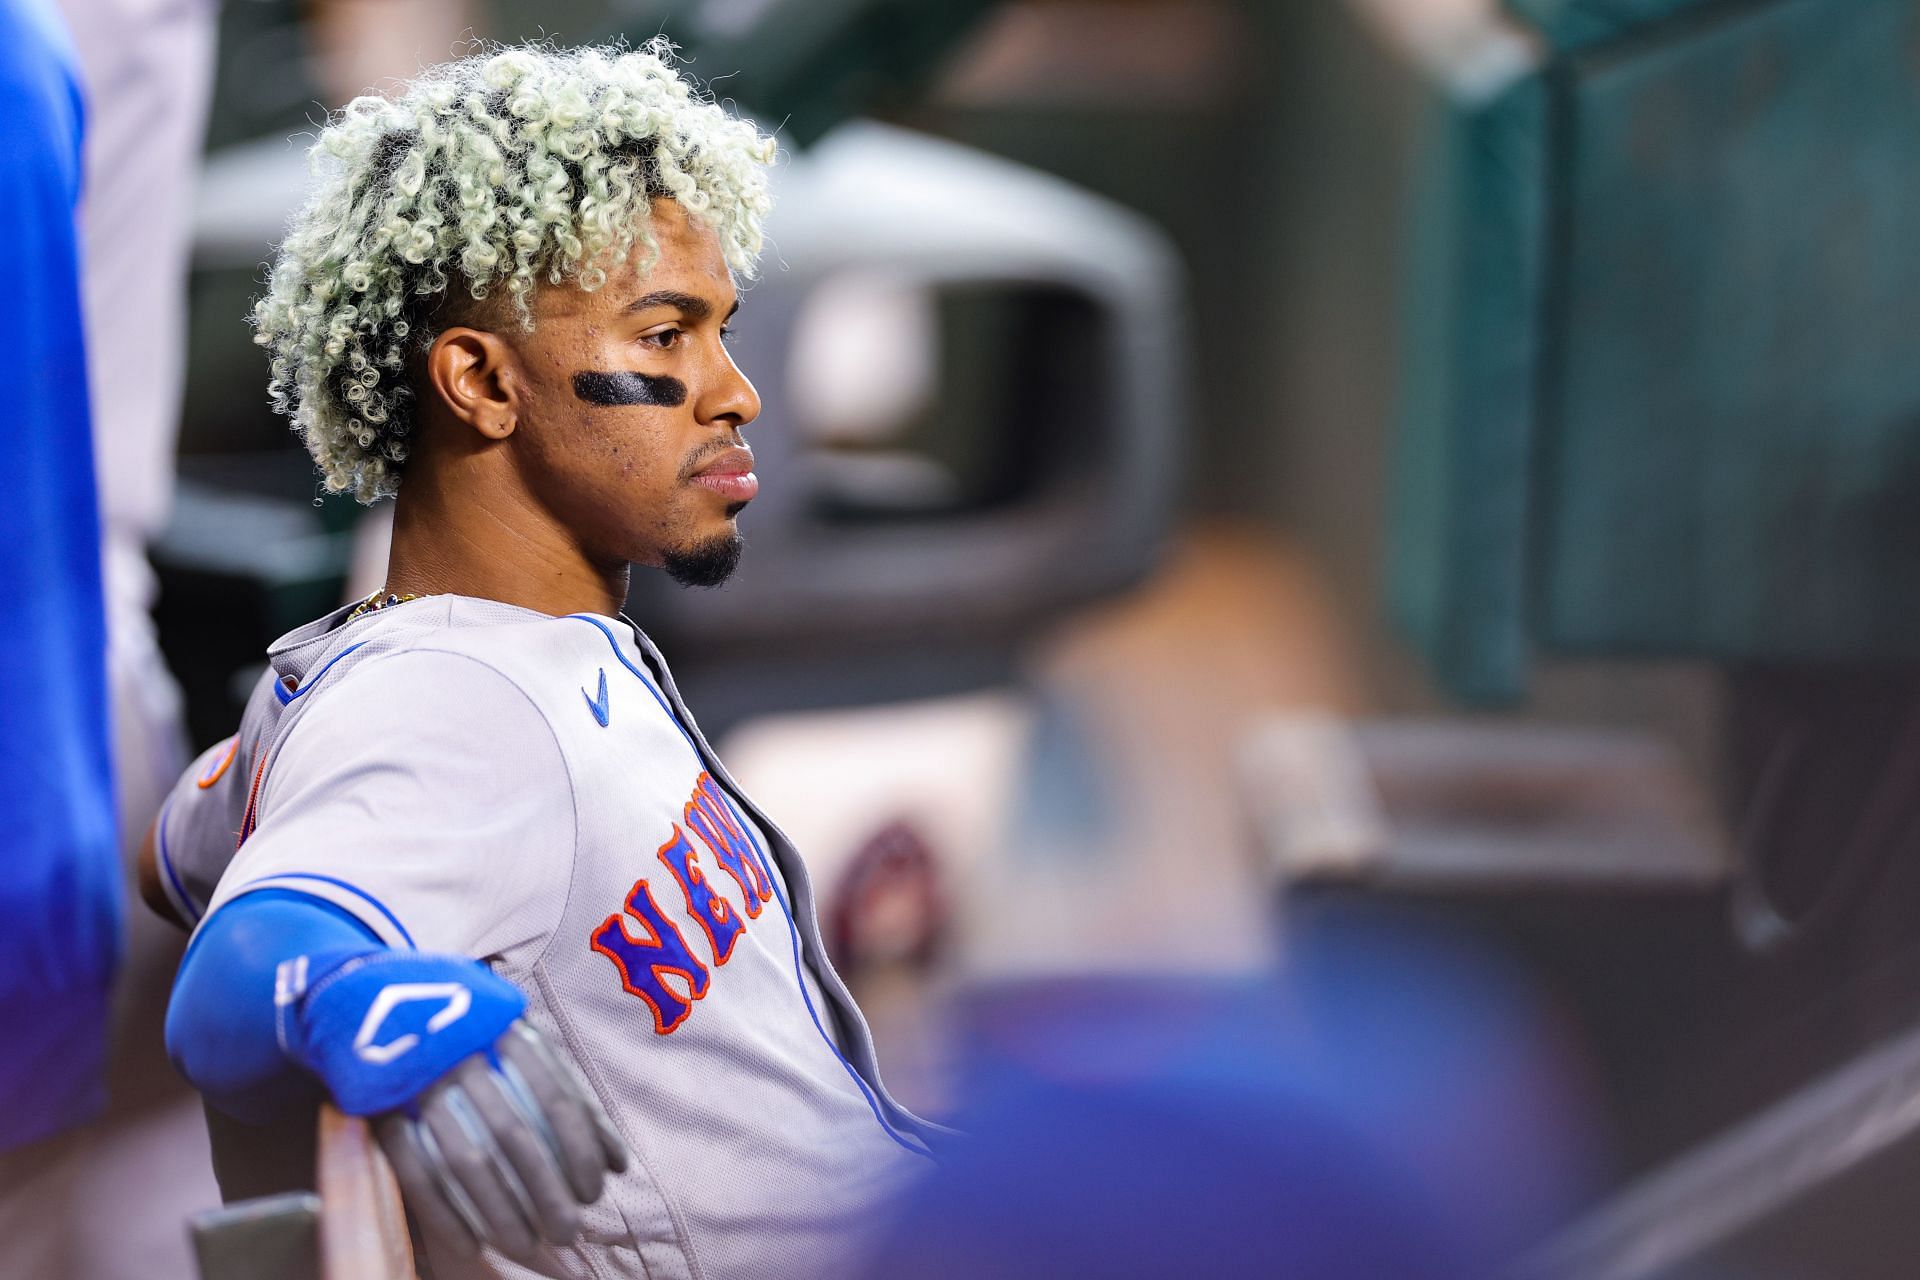 New York Mets infielder Francisco Lindor crushed a solo home run off Miami Marlins starting pitcher Sandy Alcantara tonight.